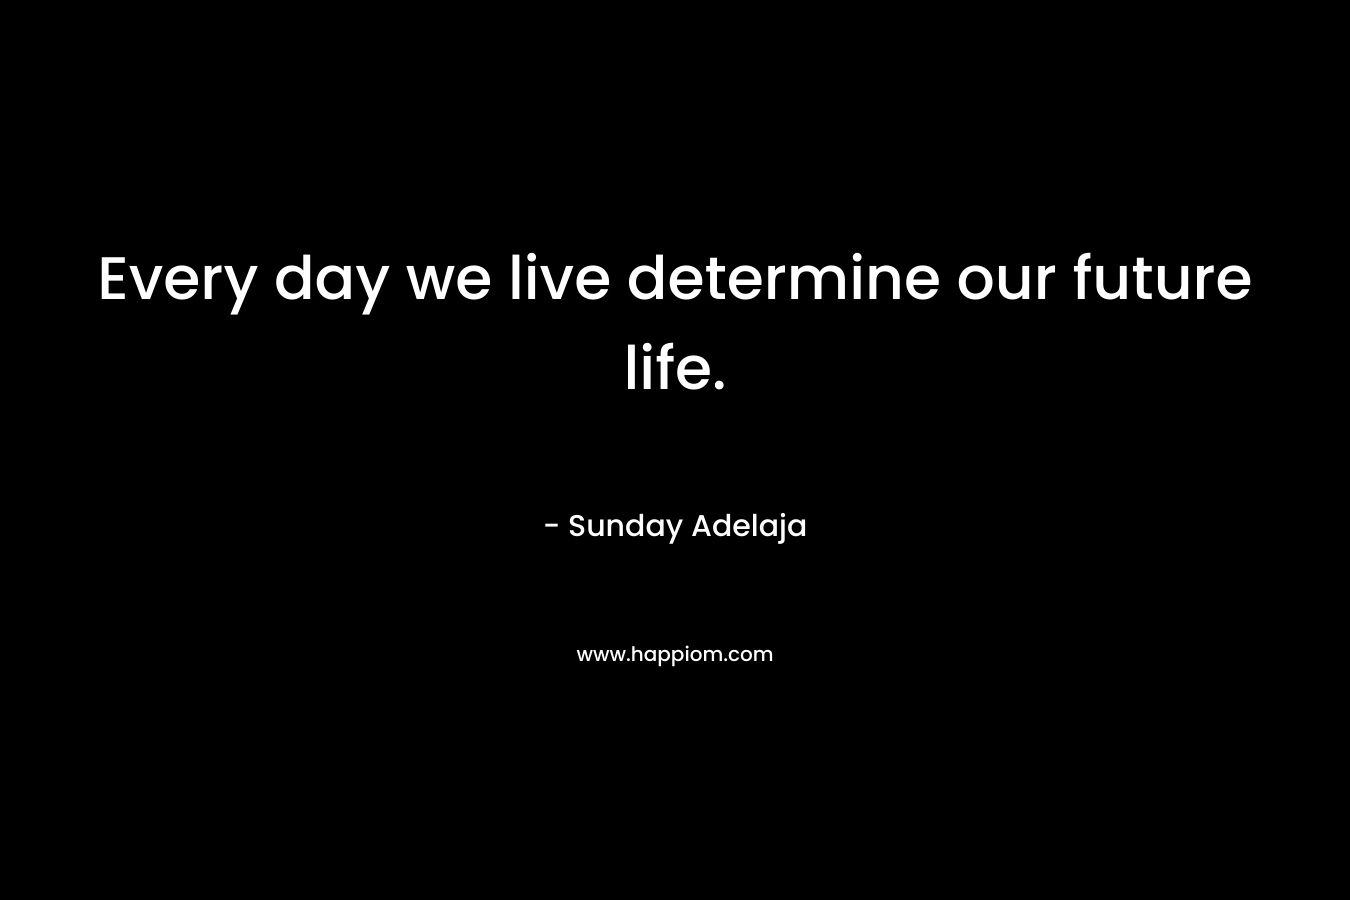 Every day we live determine our future life.